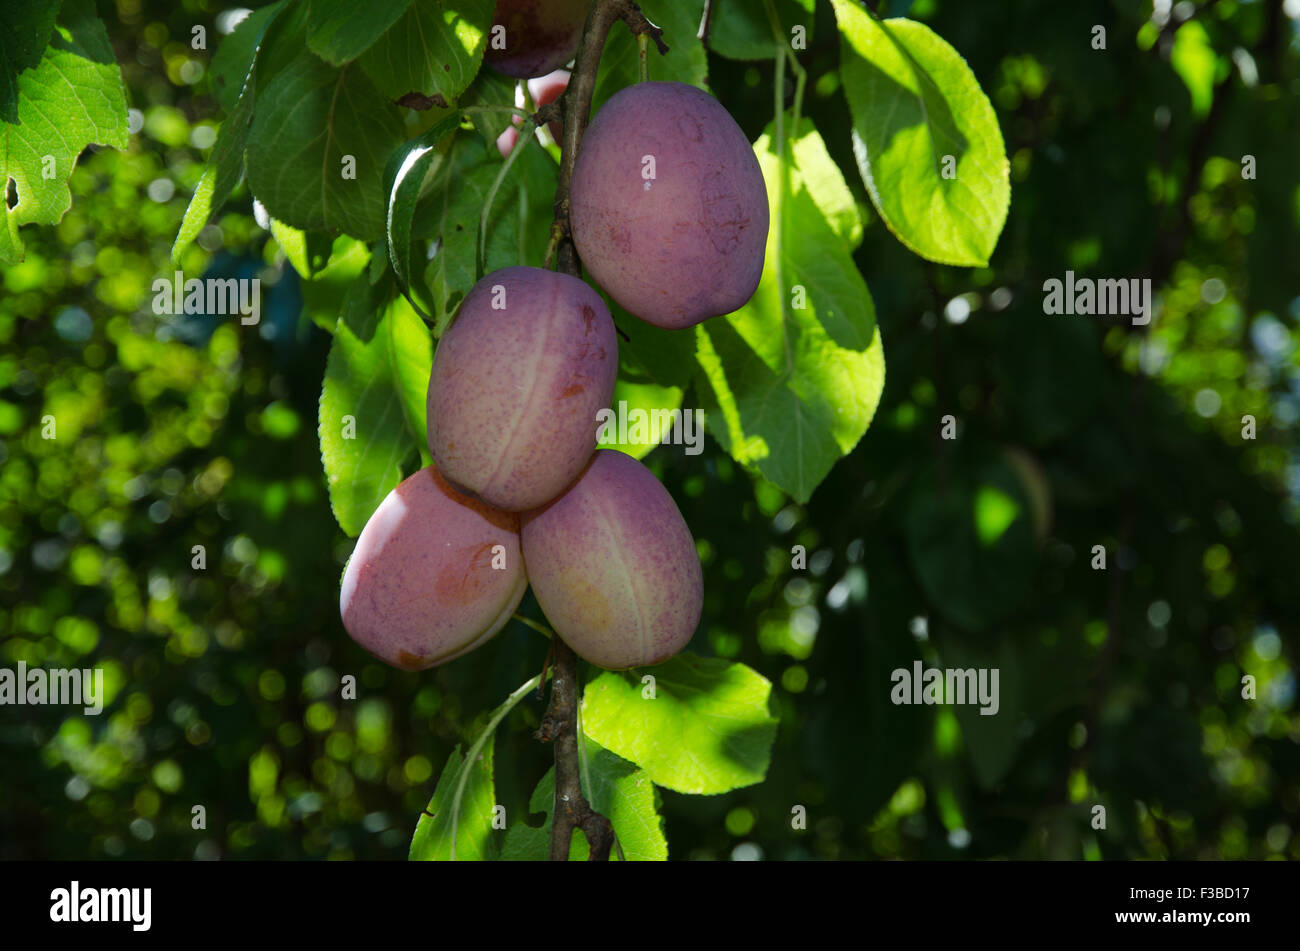 Riped plums in a garden just before harvest Stock Photo